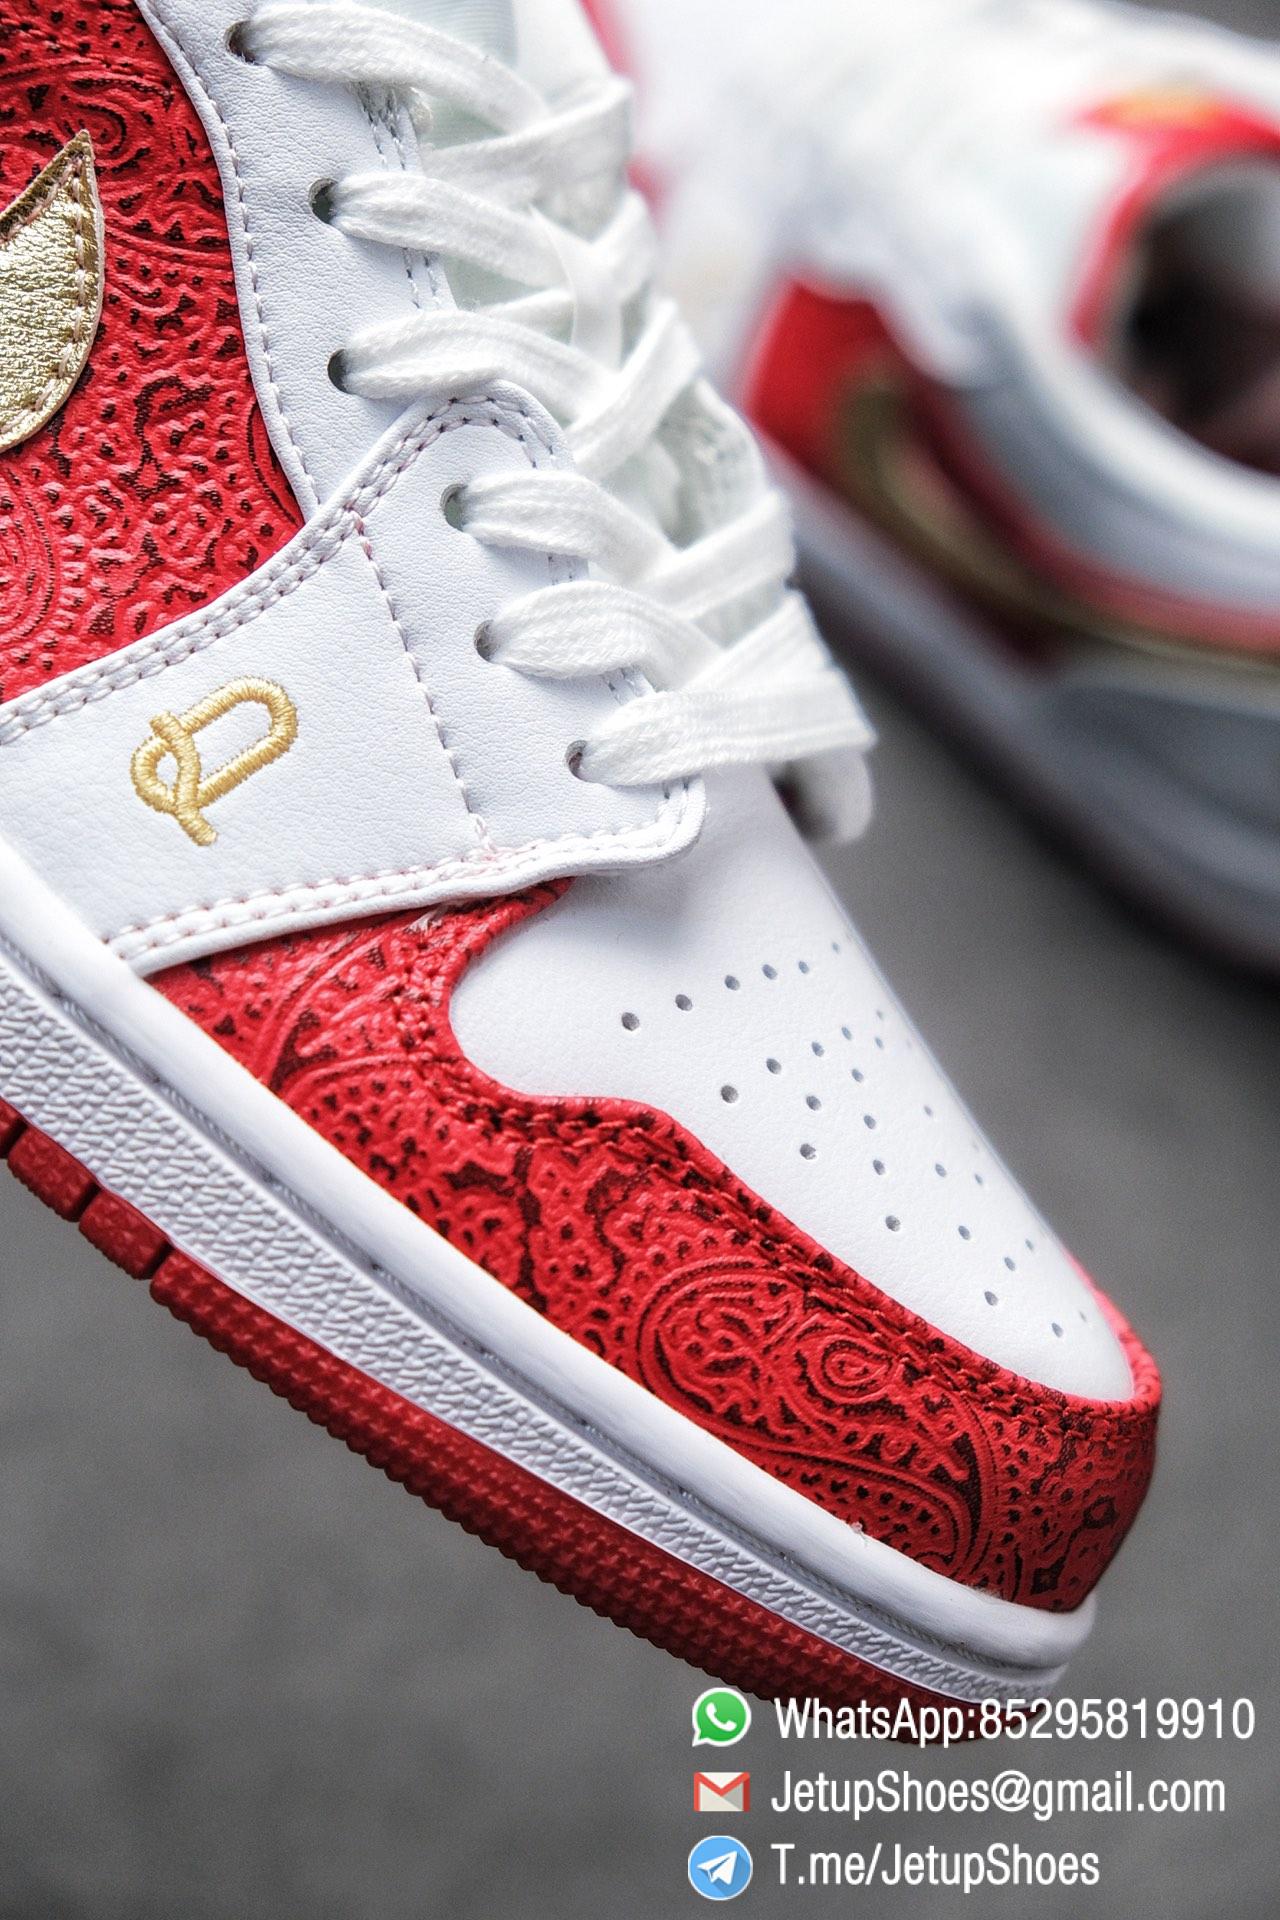 RepSnkrs Air Jordan 1 Low SE Spades White Leather Base Red Rubber Outsole Embroidered letters K Q Best Replica Sneakers 06